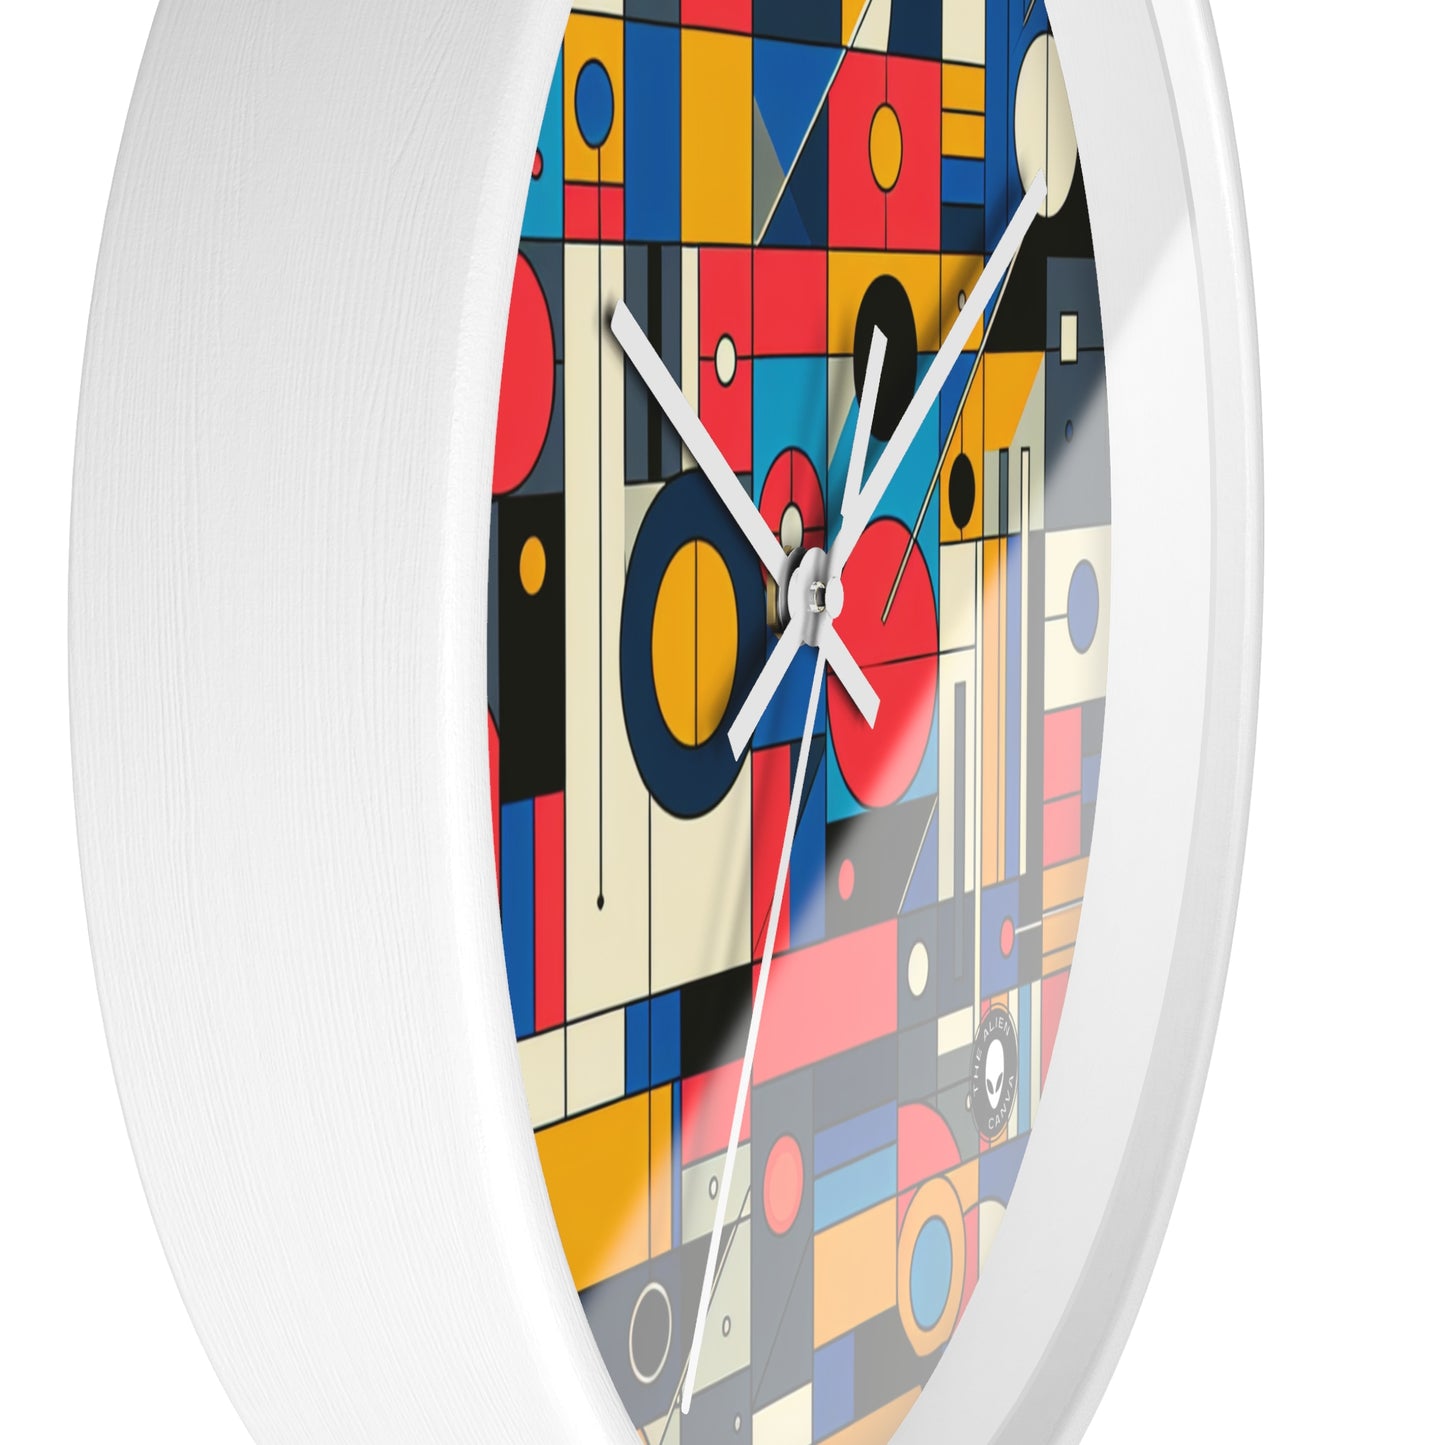 "Harmony in Nature: Geometric Abstraction" - The Alien Wall Clock Geometric Abstraction